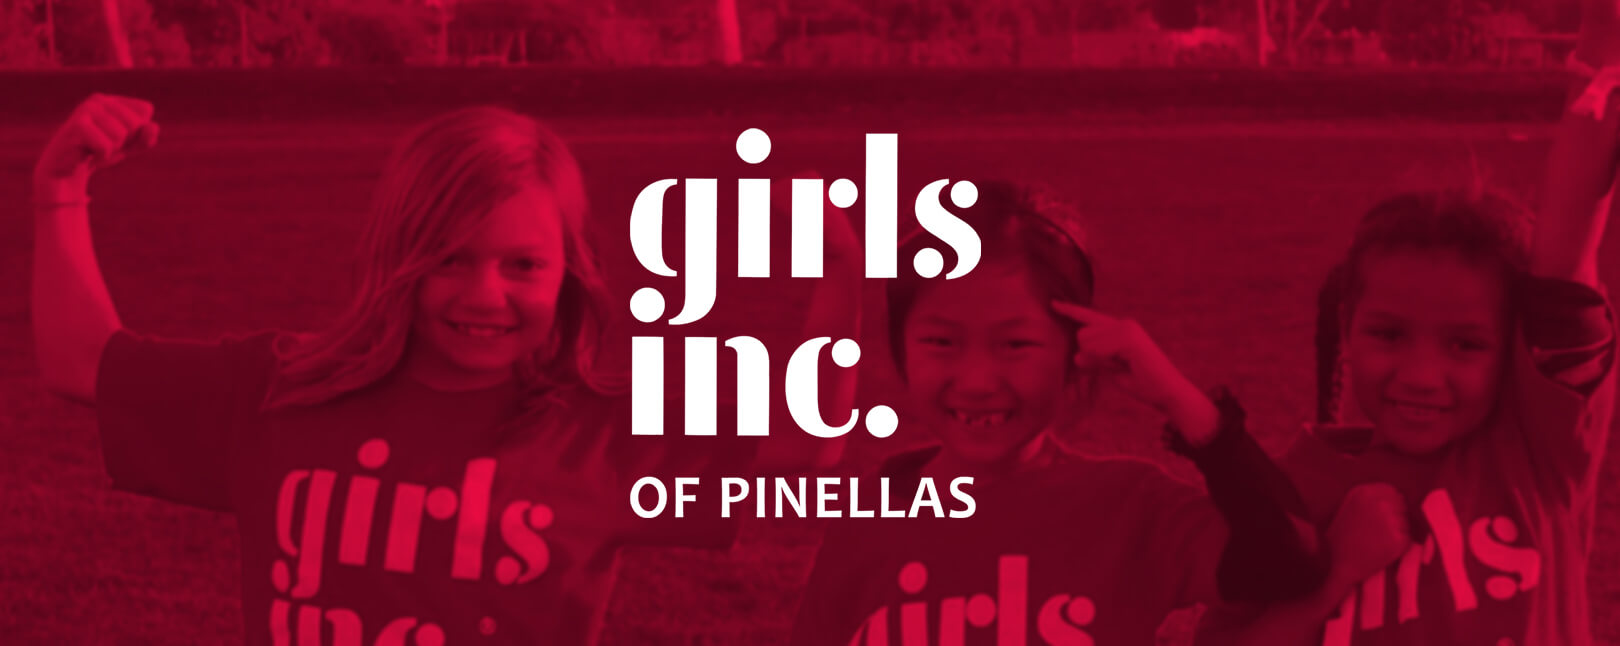 Chargebacks911® Contributions Honored by Girls Inc. of Pinellas